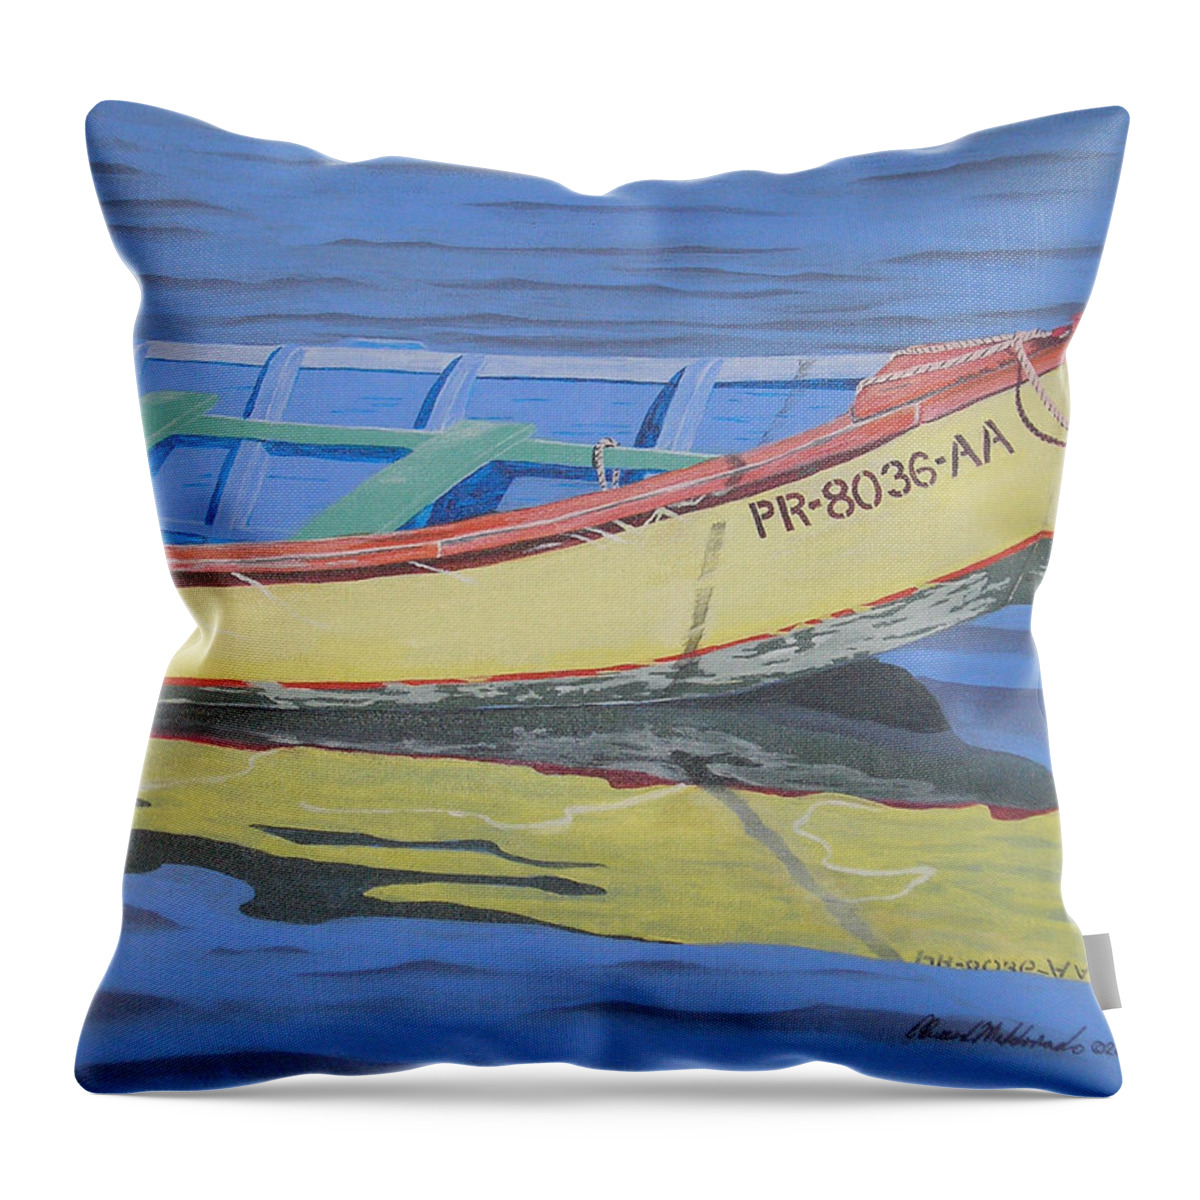 Realism Throw Pillow featuring the painting Boat by Edward Maldonado